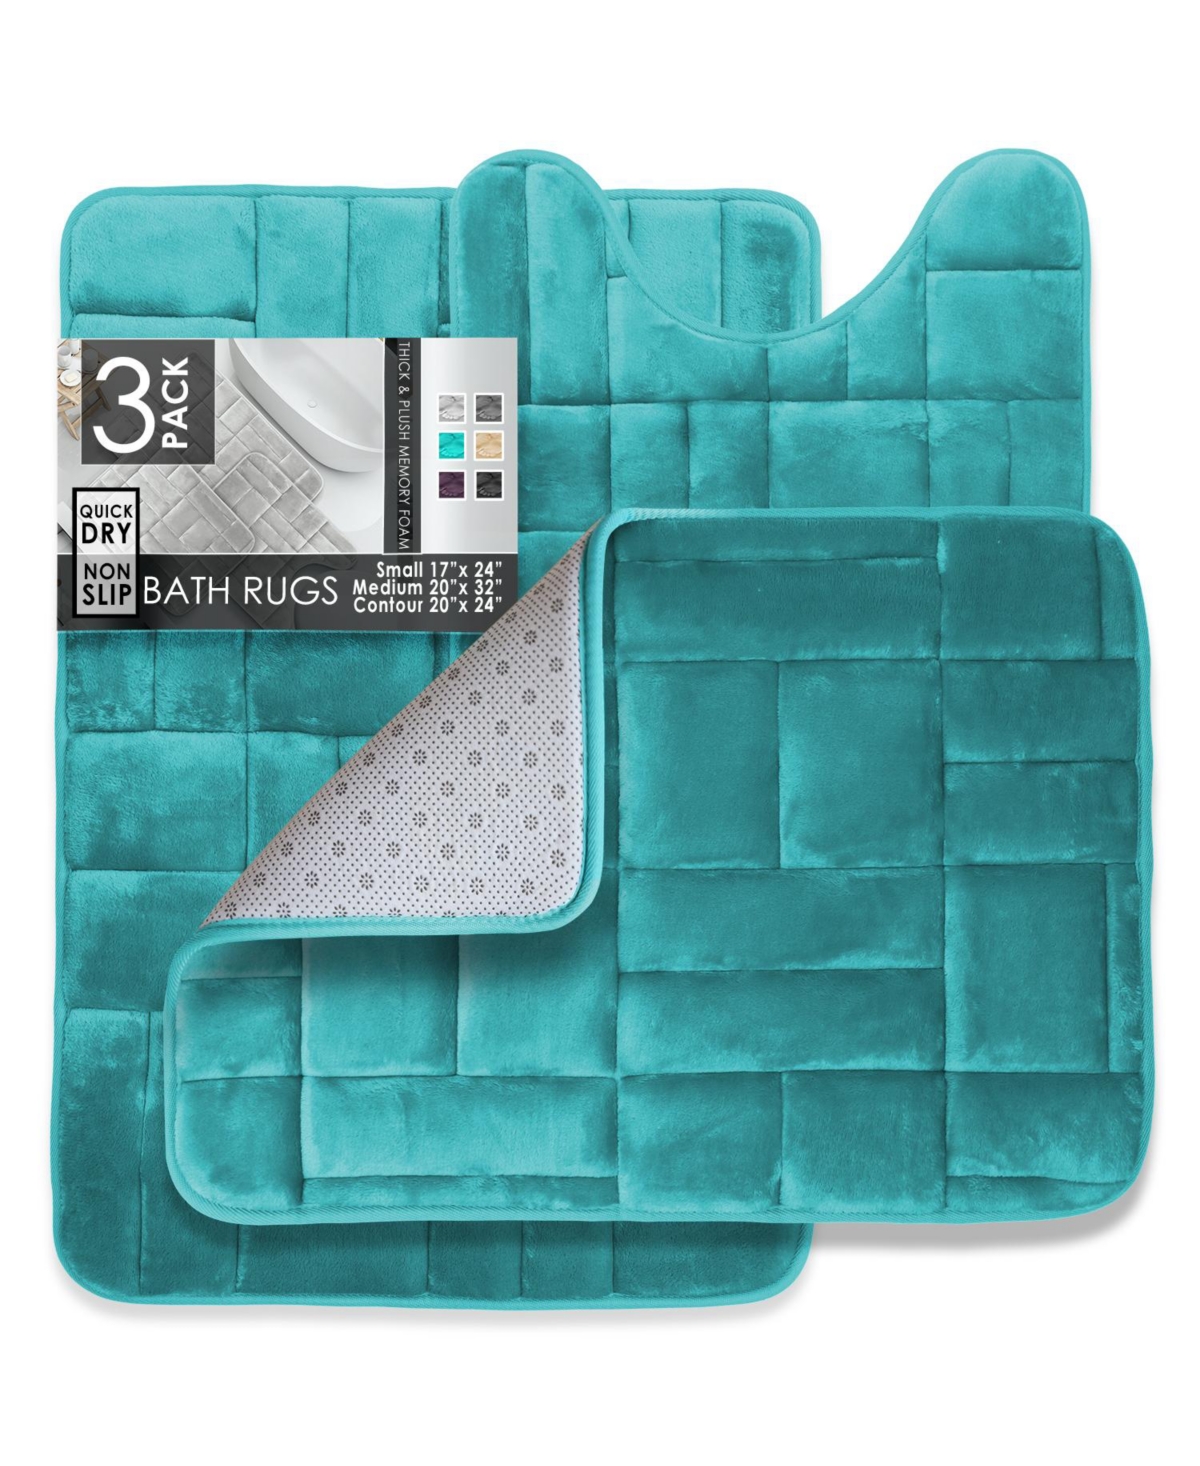 Soft And Non-slip Memory Foam Bath Rug - Quick Drying And